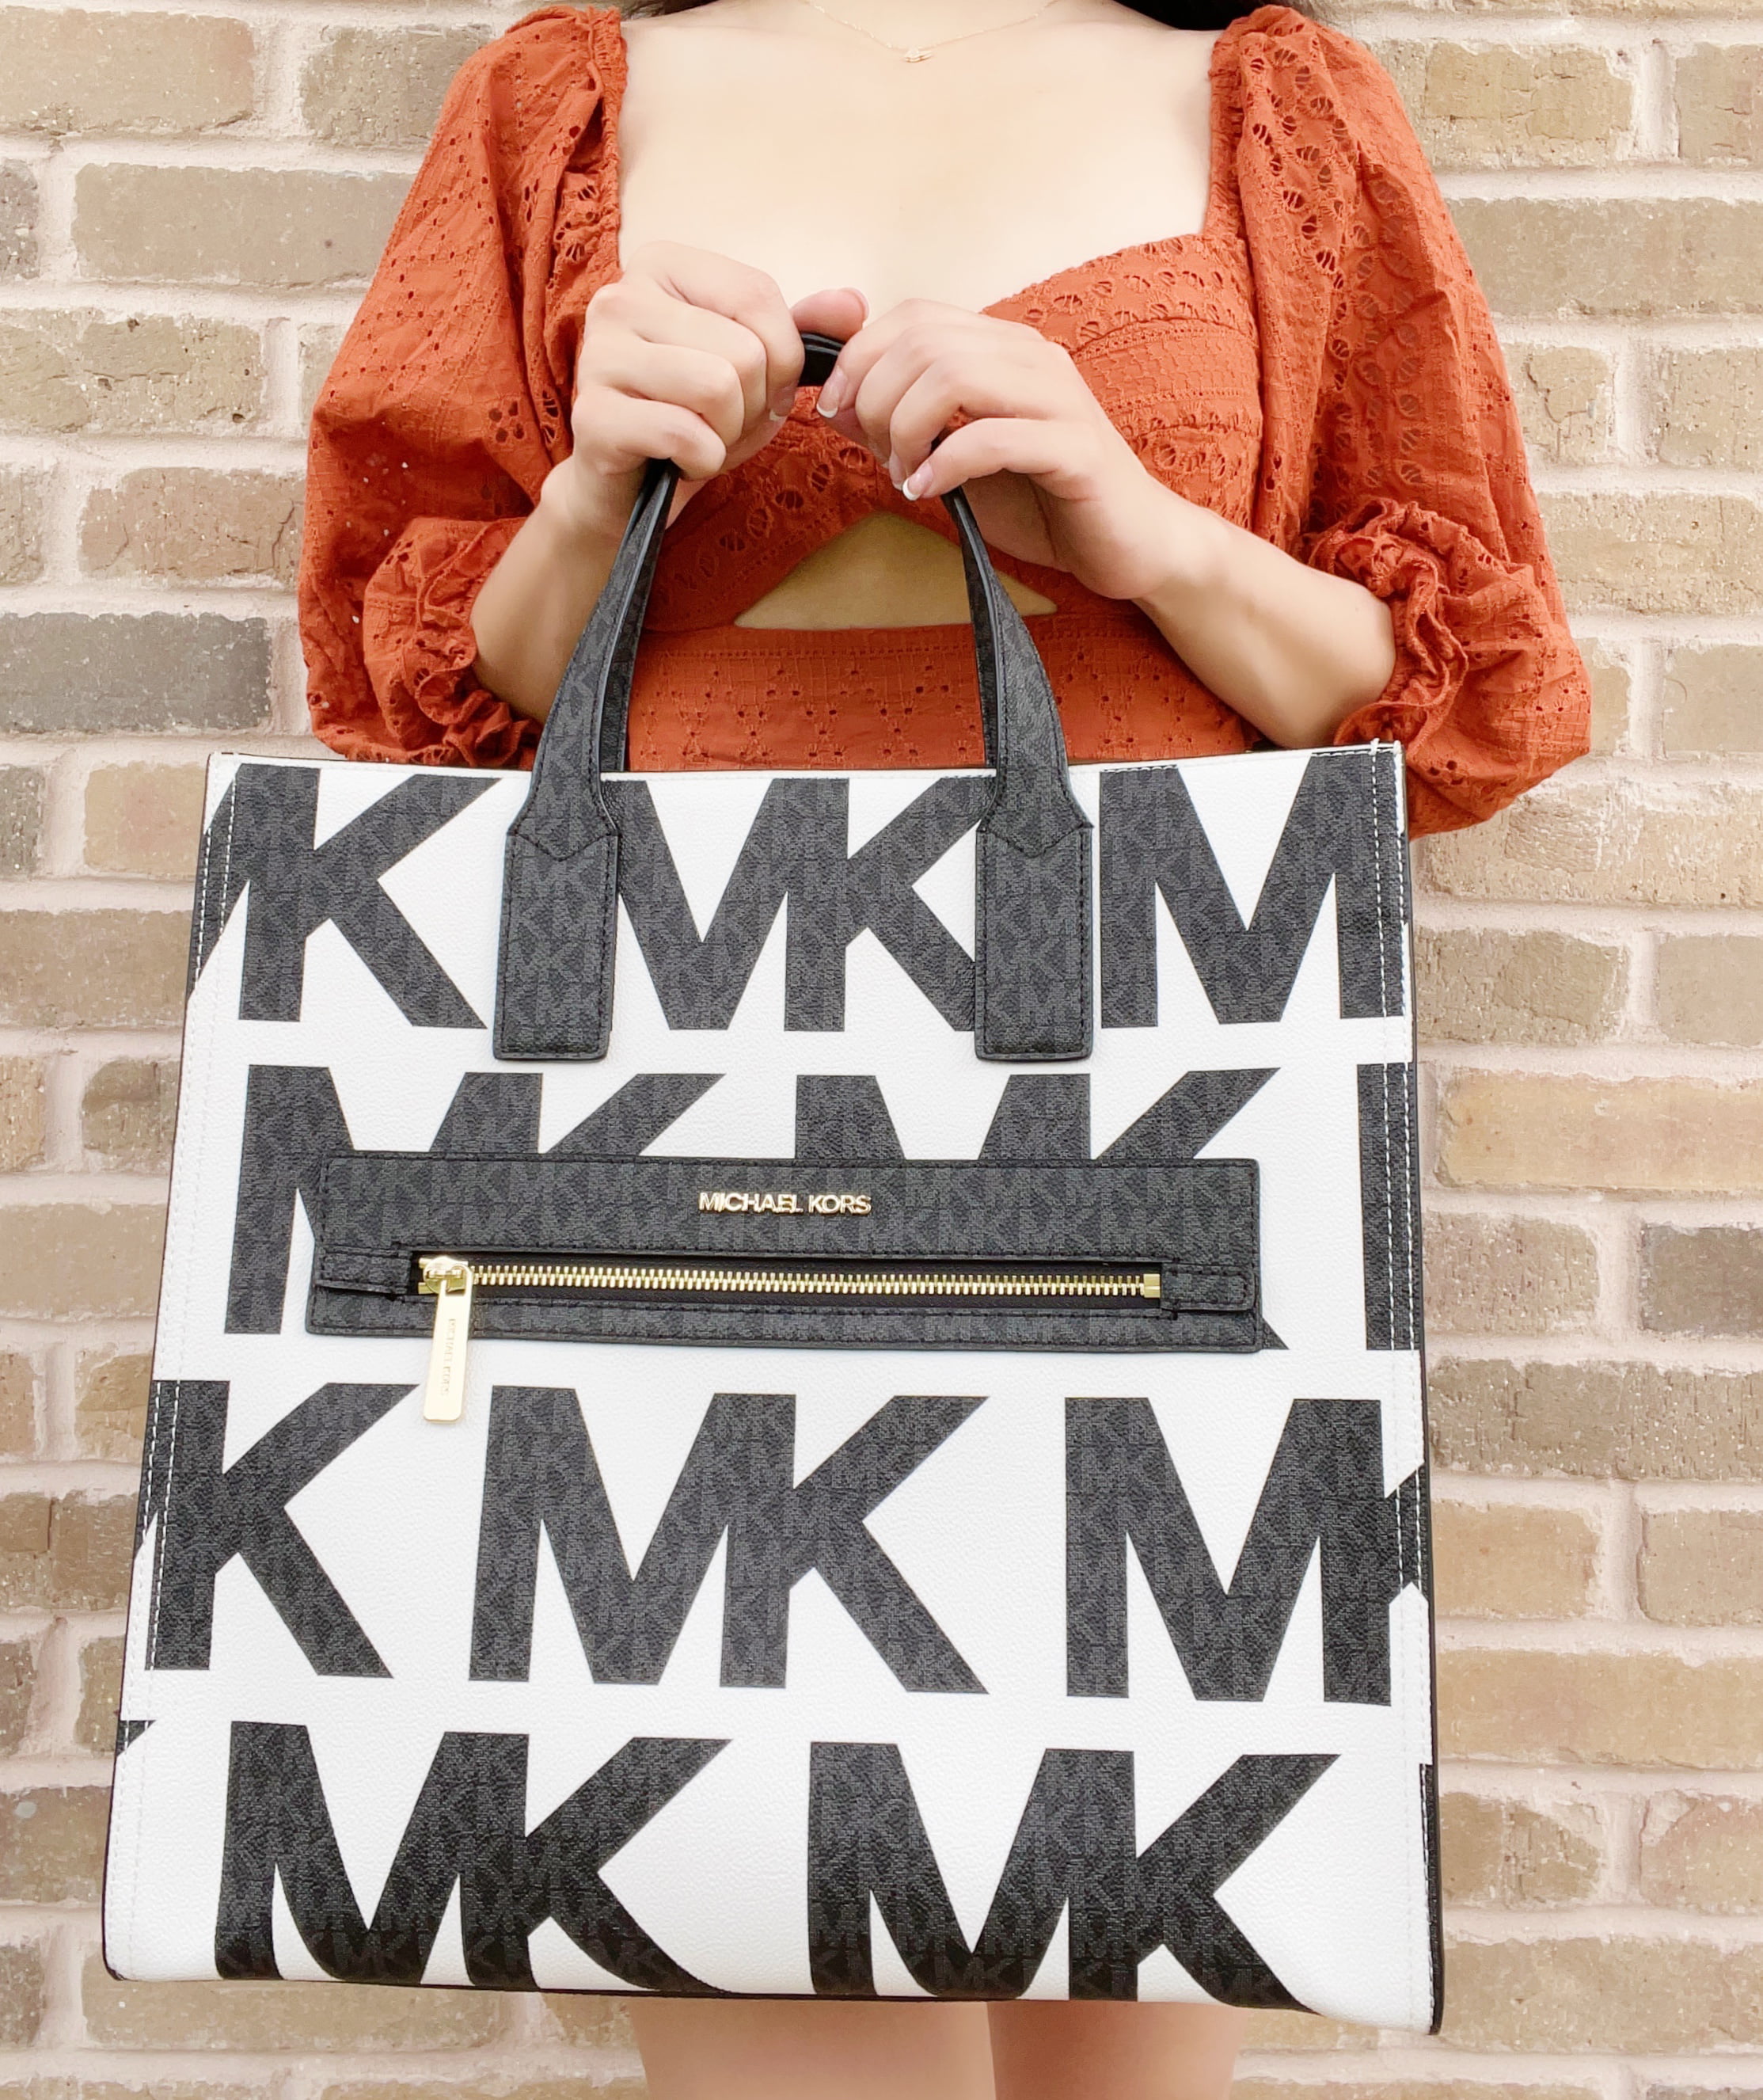 Michael Kors MK Kenly Large Logo Tote Bag - Black Multi - $219 (56% Off  Retail) New With Tags - From Kash